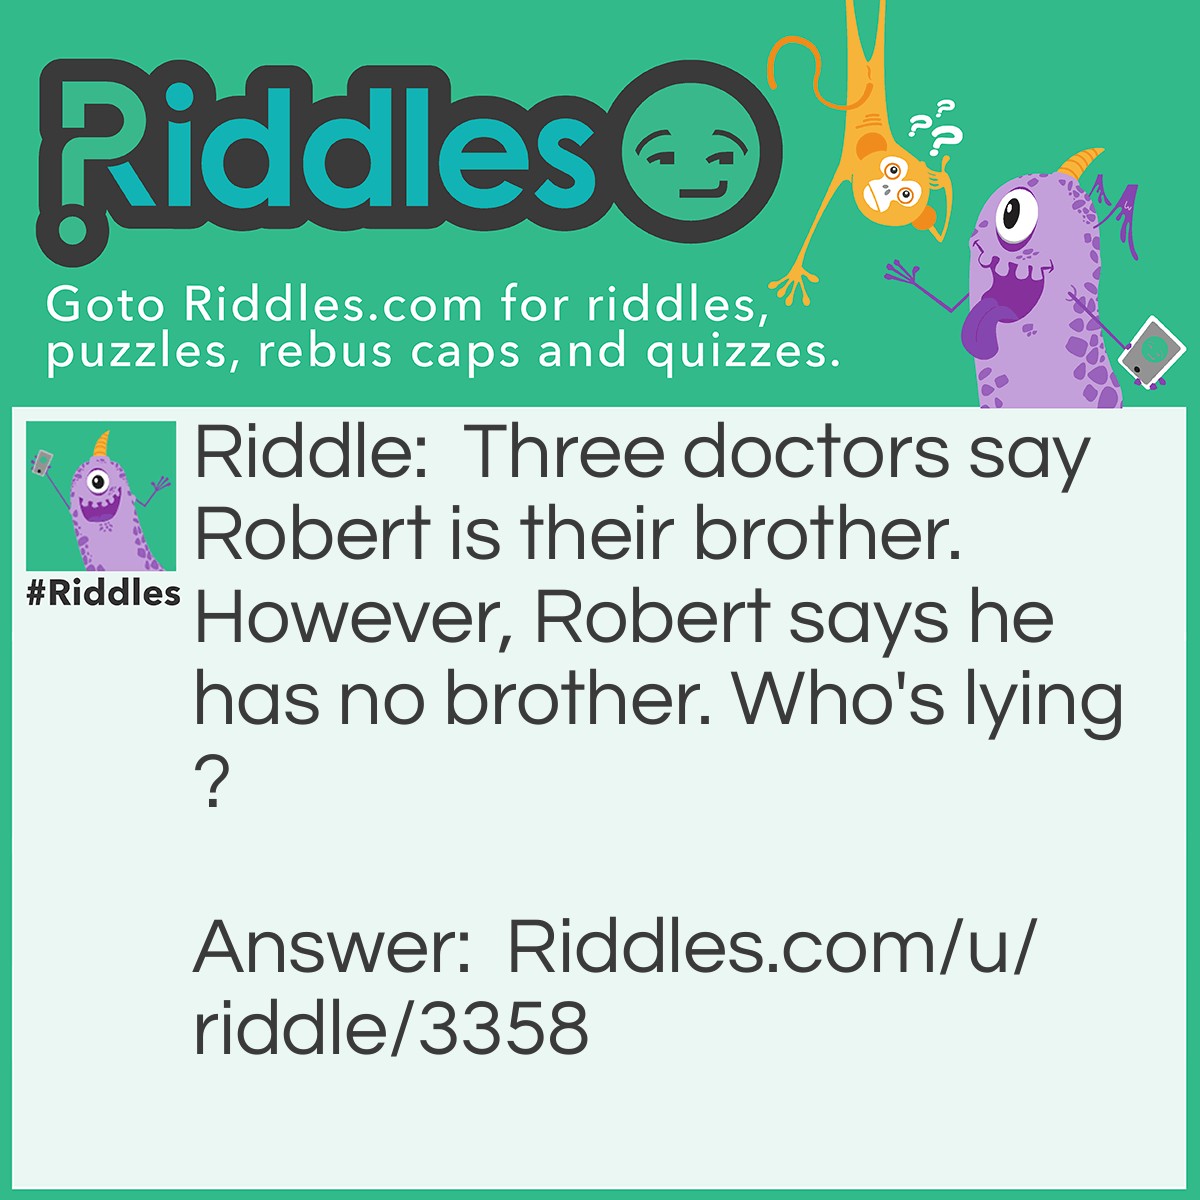 Riddle: Three doctors say Robert is their brother. However, Robert says he has no brother. Who's lying? Answer: No one. The doctors are all girls.